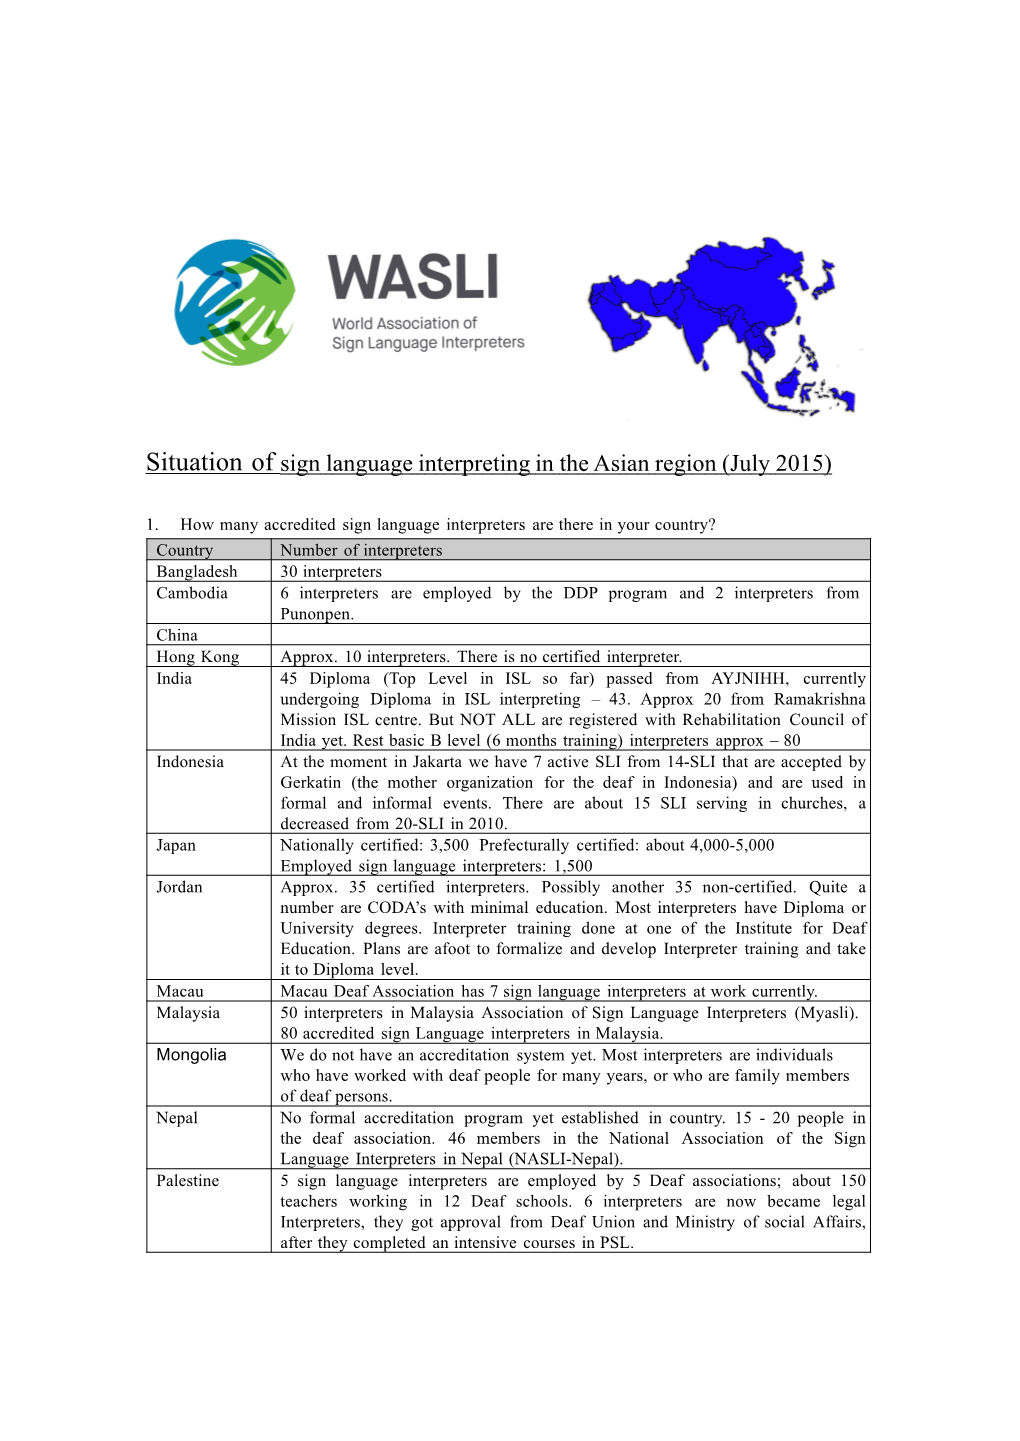 Situation of Sign Language Interpreting in the Asian Region (July 2015)